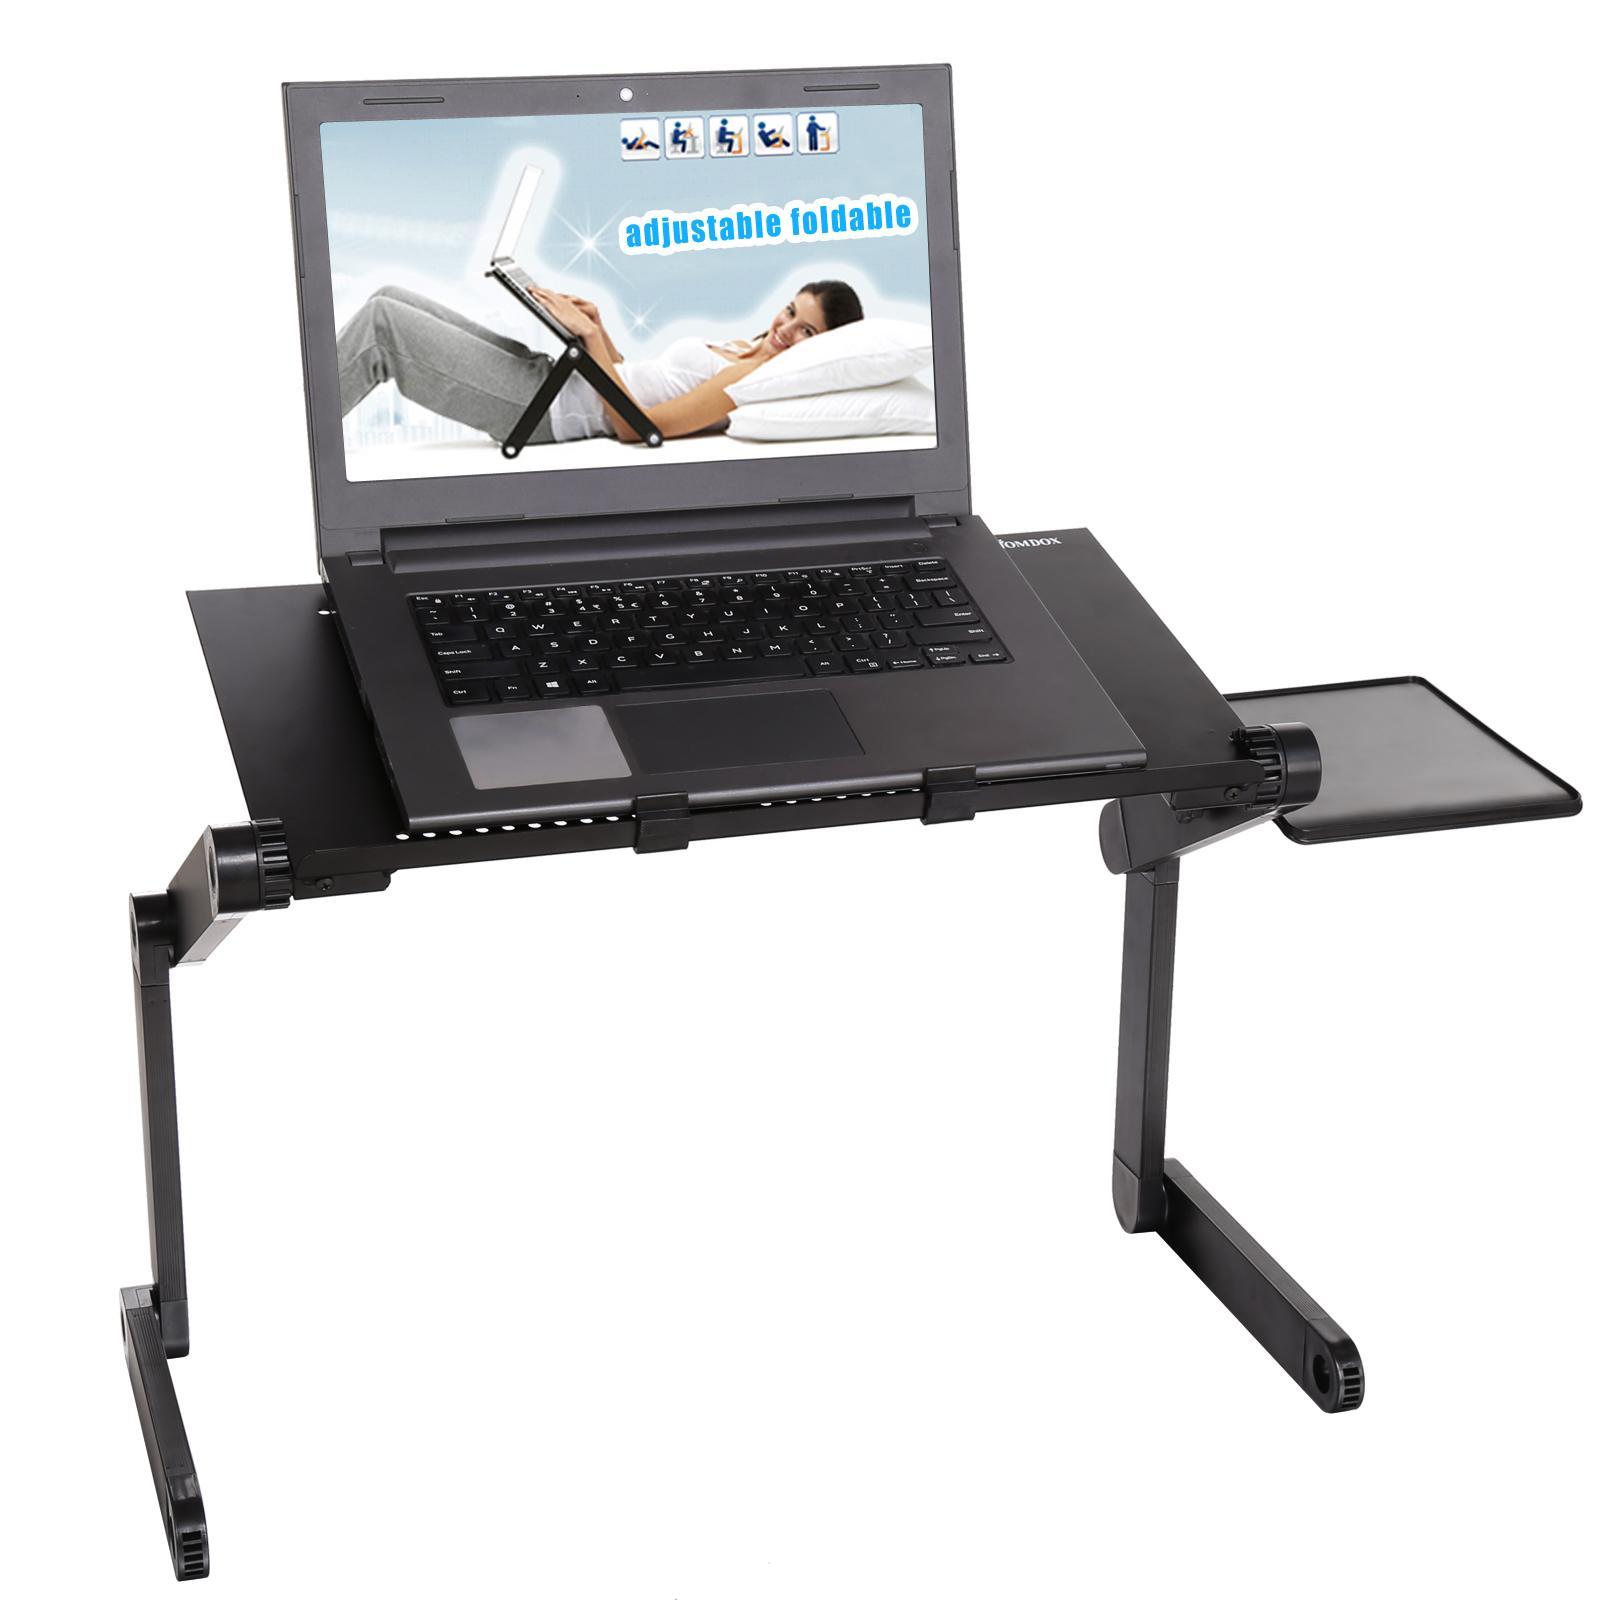 Portable Laptop Table Stand with Mouse Board Cooling Fan Pad Fully Adjustable-Light Weight Aluminum-Black Bed Tray Desk Book HPPY - image 3 of 8